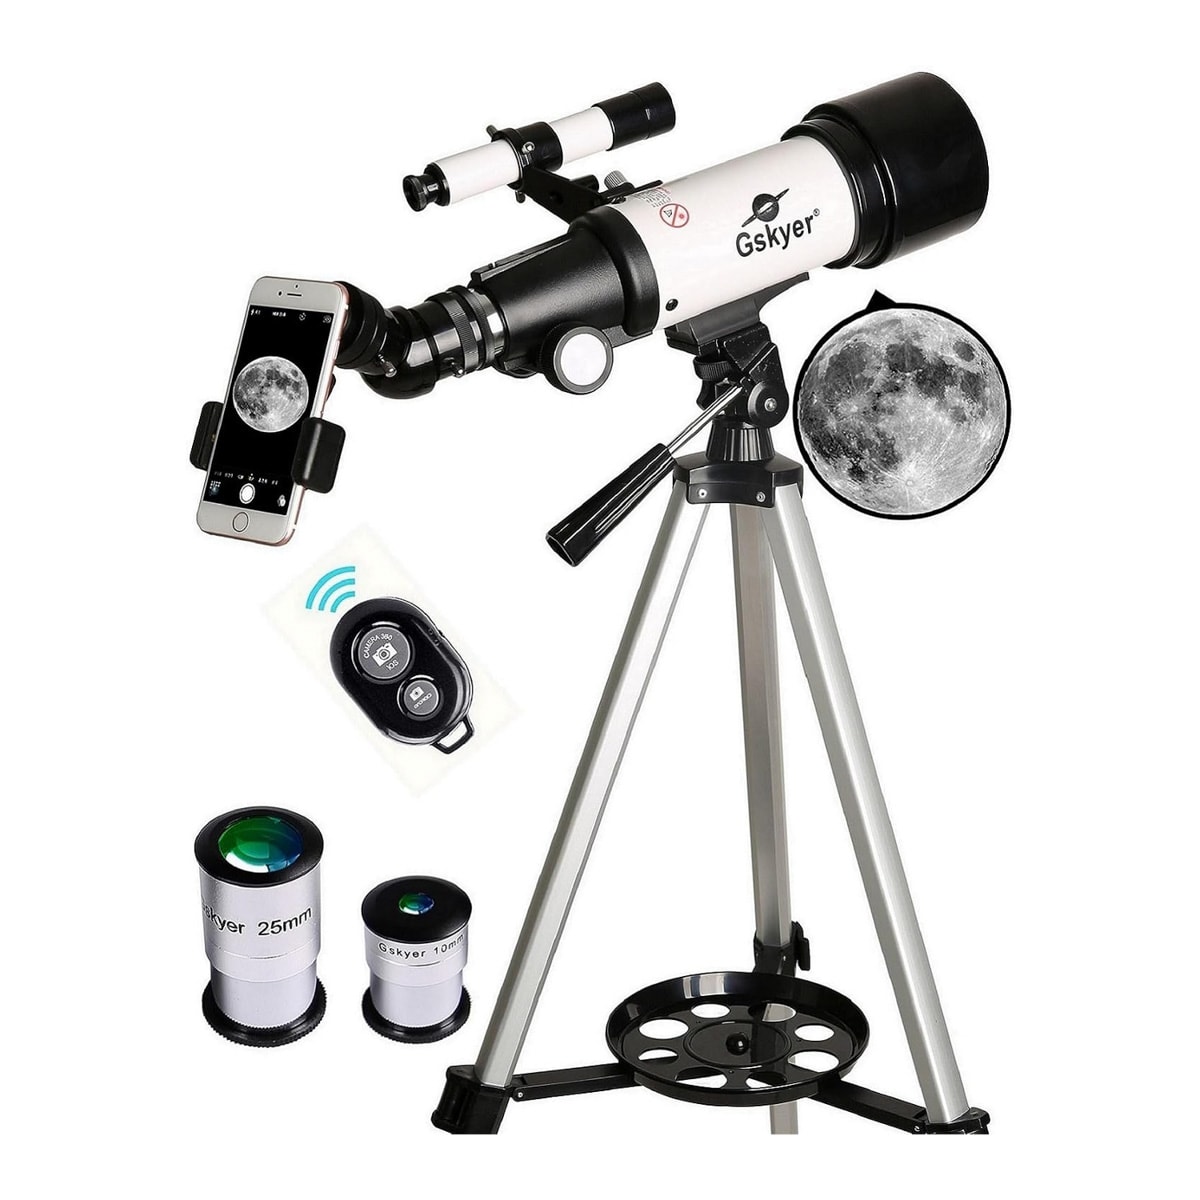 Telescope with multiple lens options and tripod.